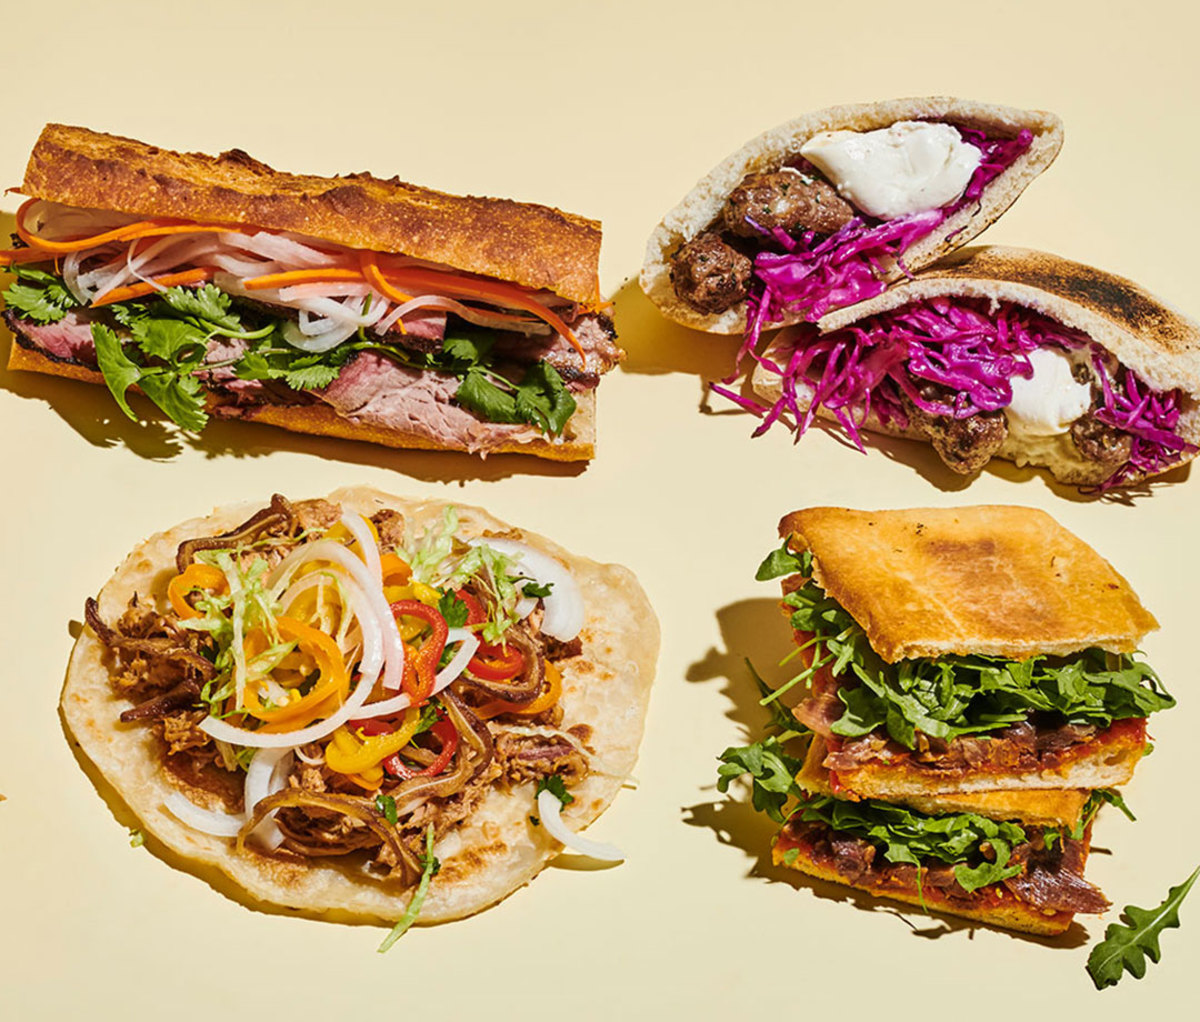 Clockwise from top left: Smoked Brisket Banh Mi, Ćevapi, Overnight Duck Confit Panini, and Pork & Peppers